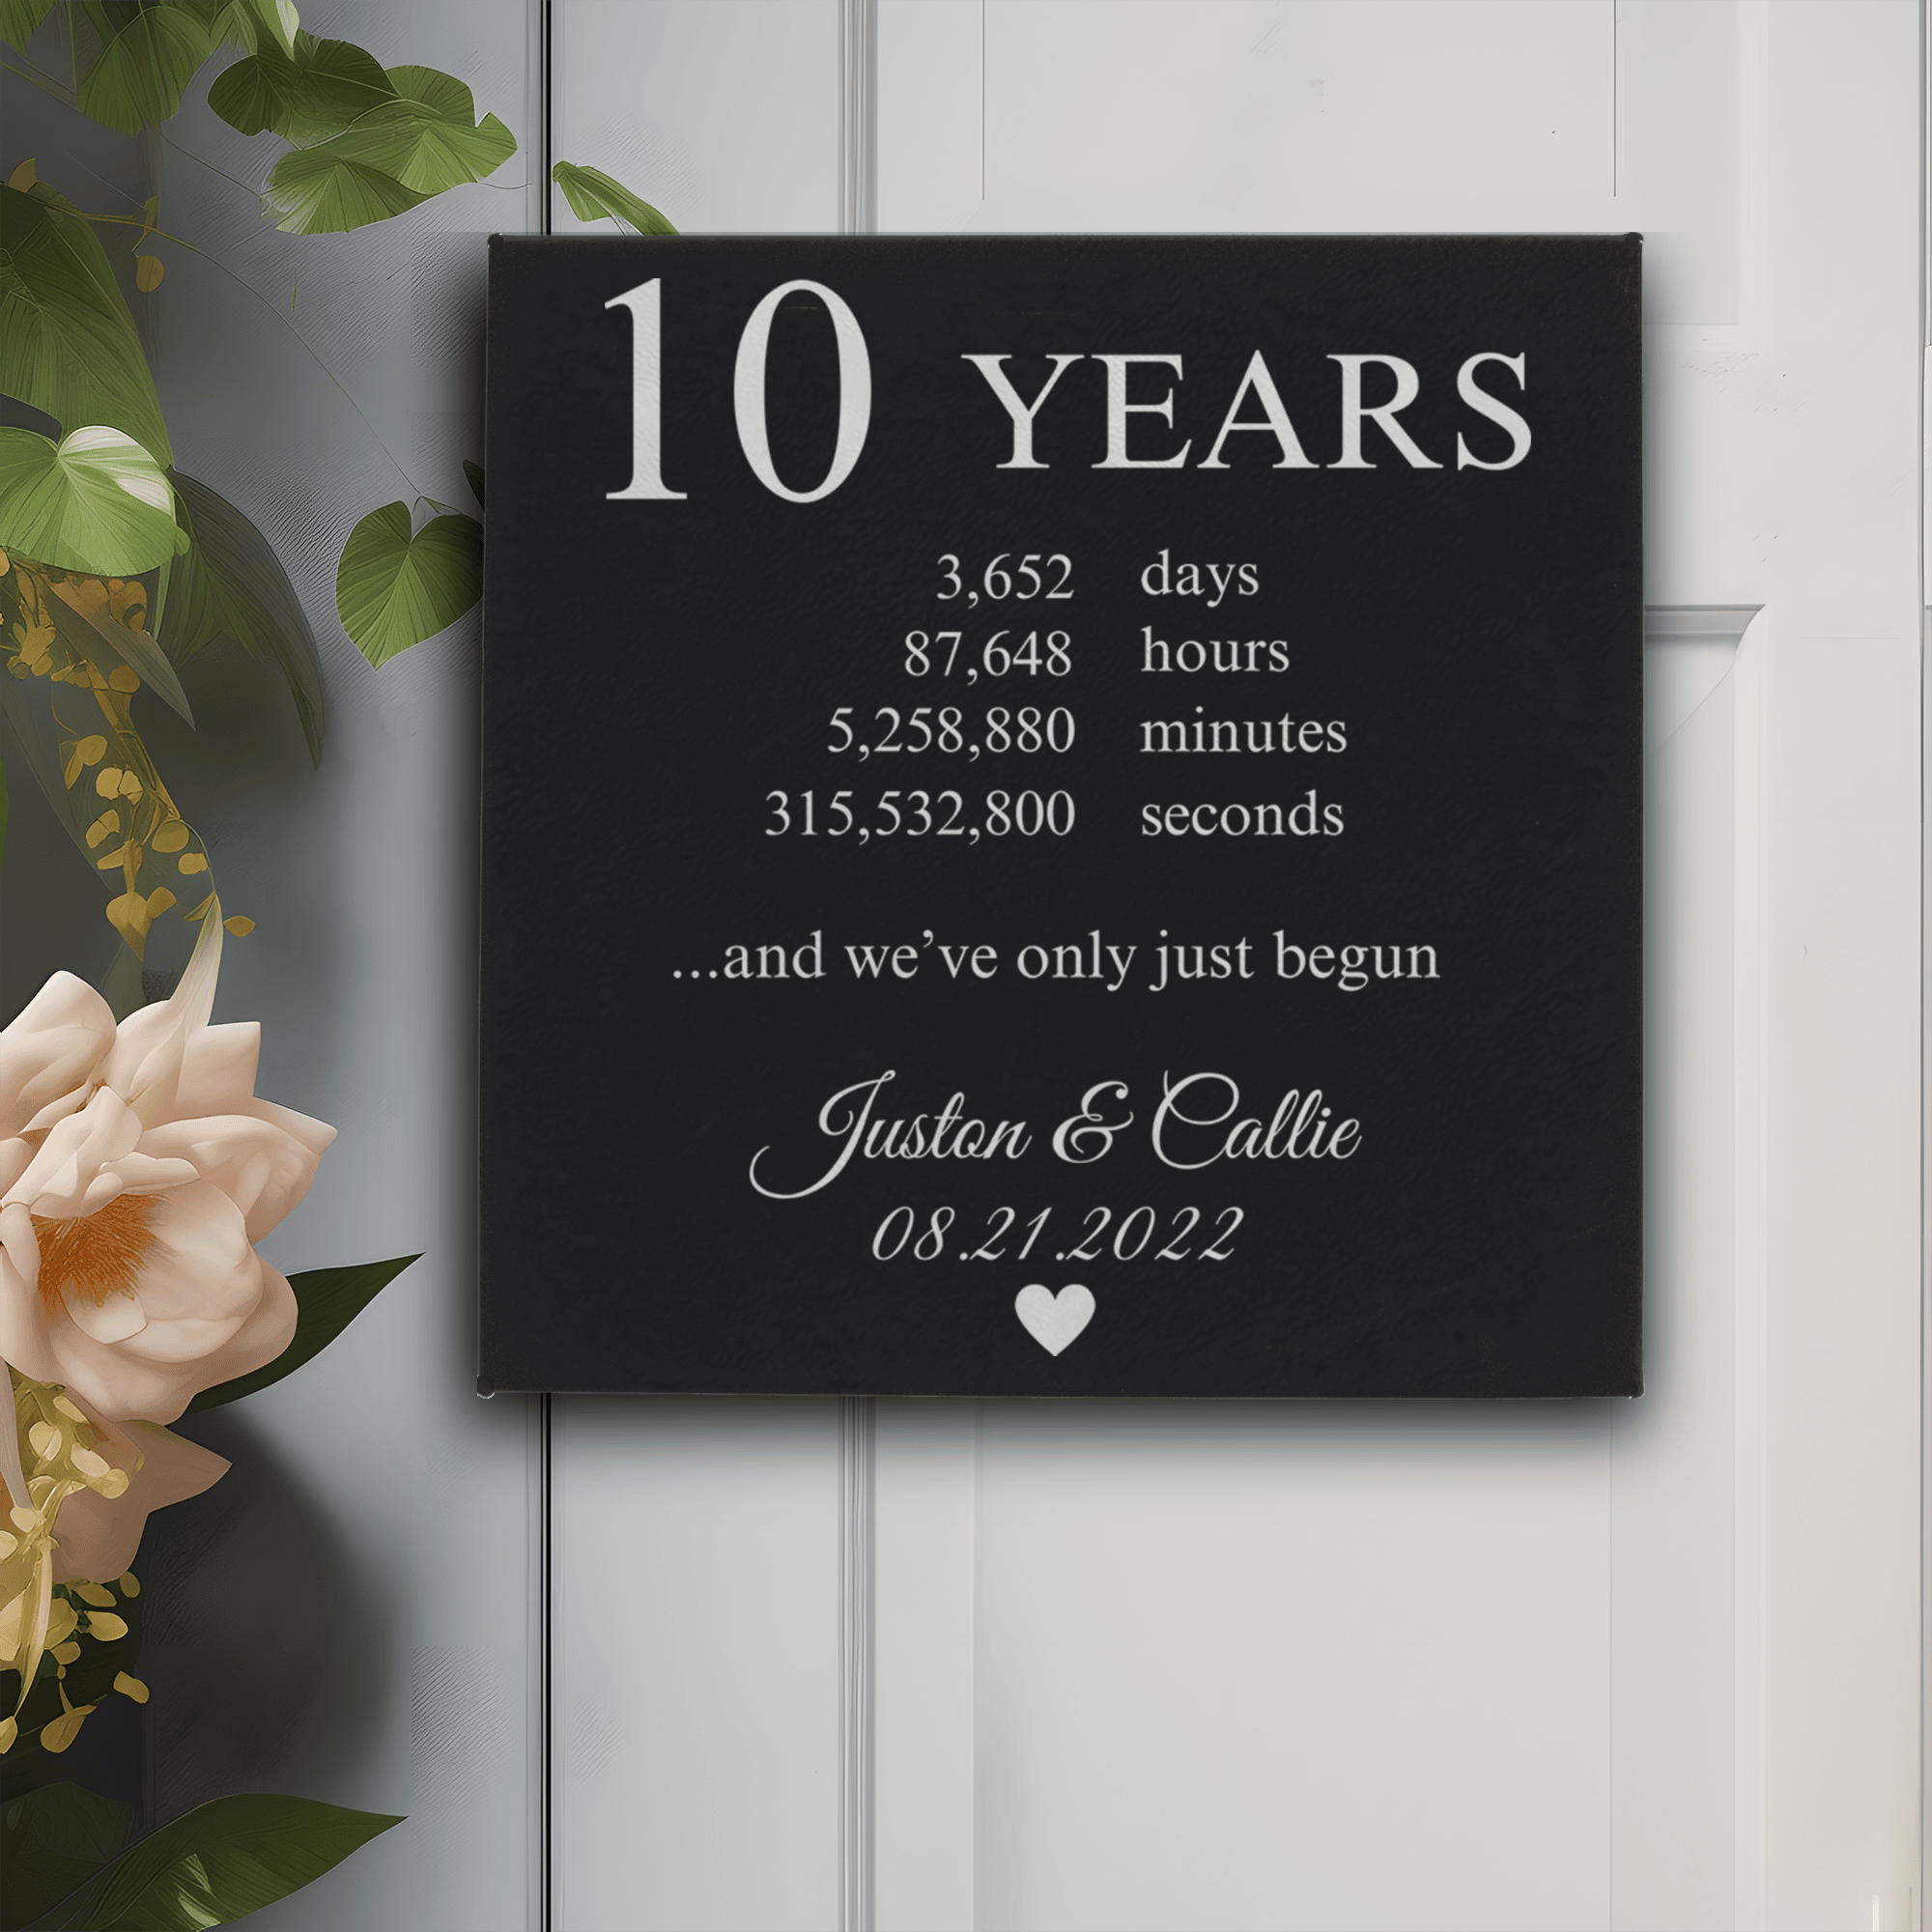 Black Silver Leather Wall Decor With 10 Year Anniversary Design